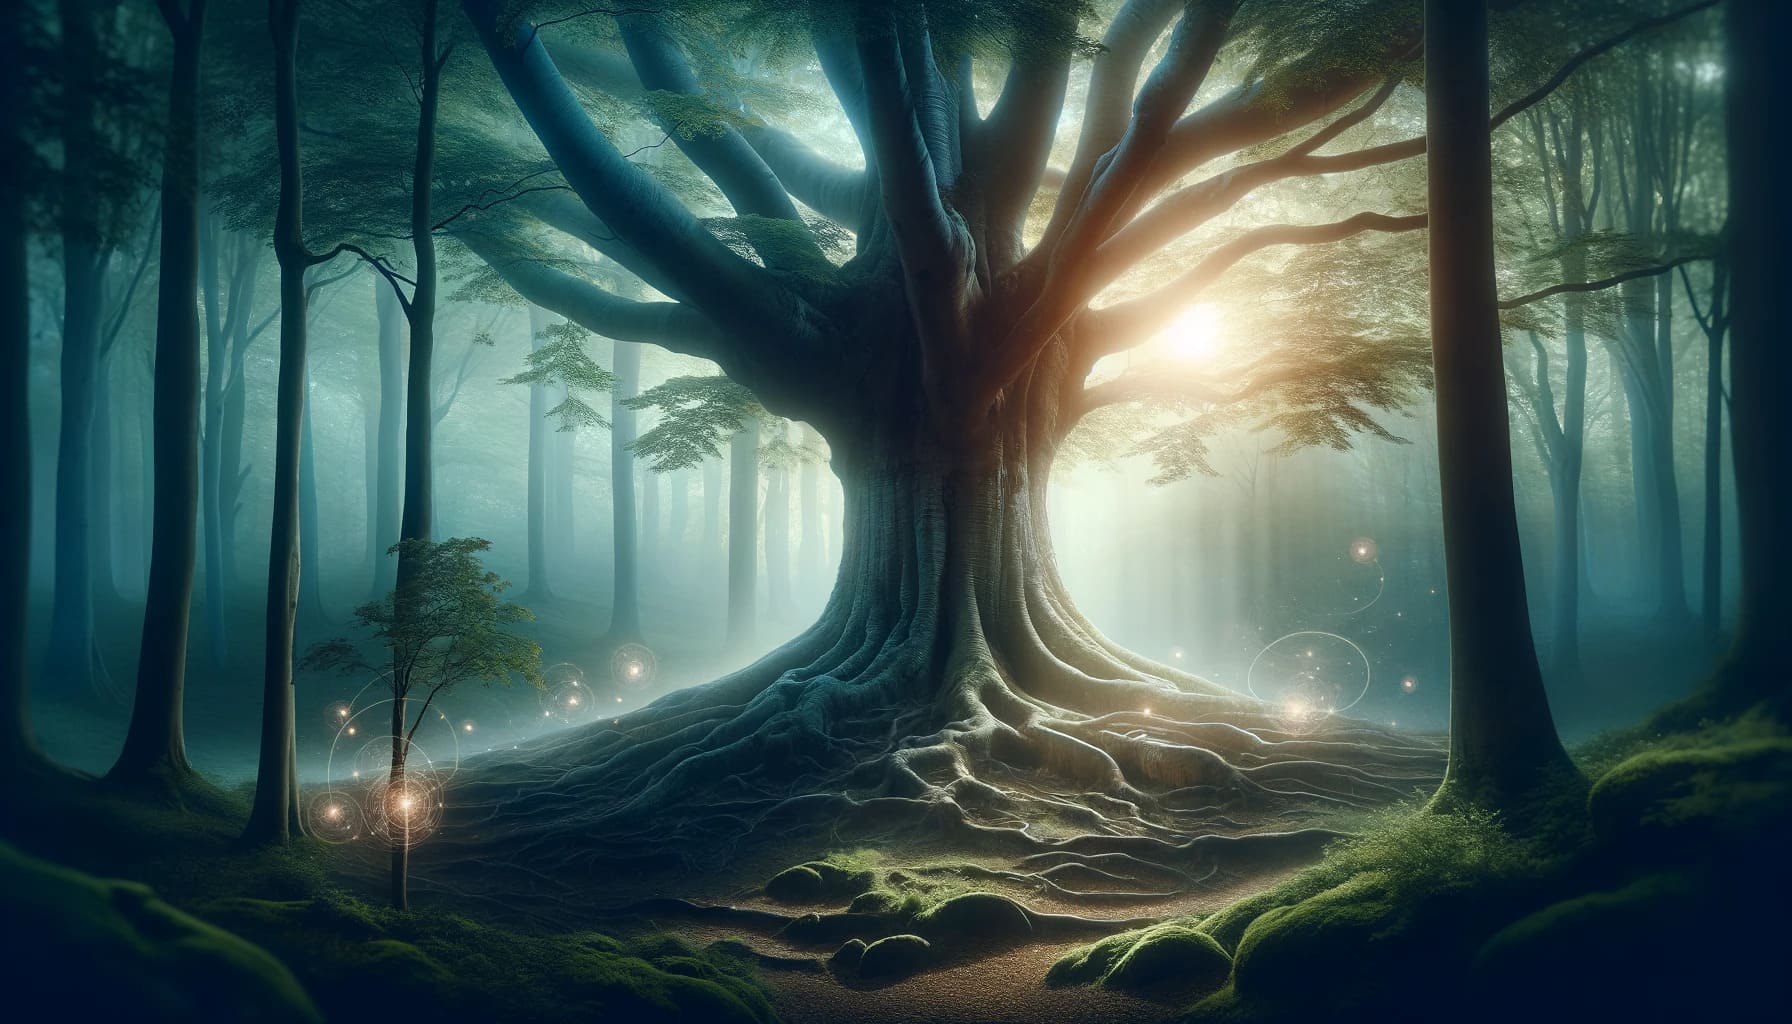 DALL·E 2023 11 19 13.33.37 A tranquil mystical forest with a large ancient tree at its center embodying wisdom and spiritual significance. The scene is bathed in soft ethere